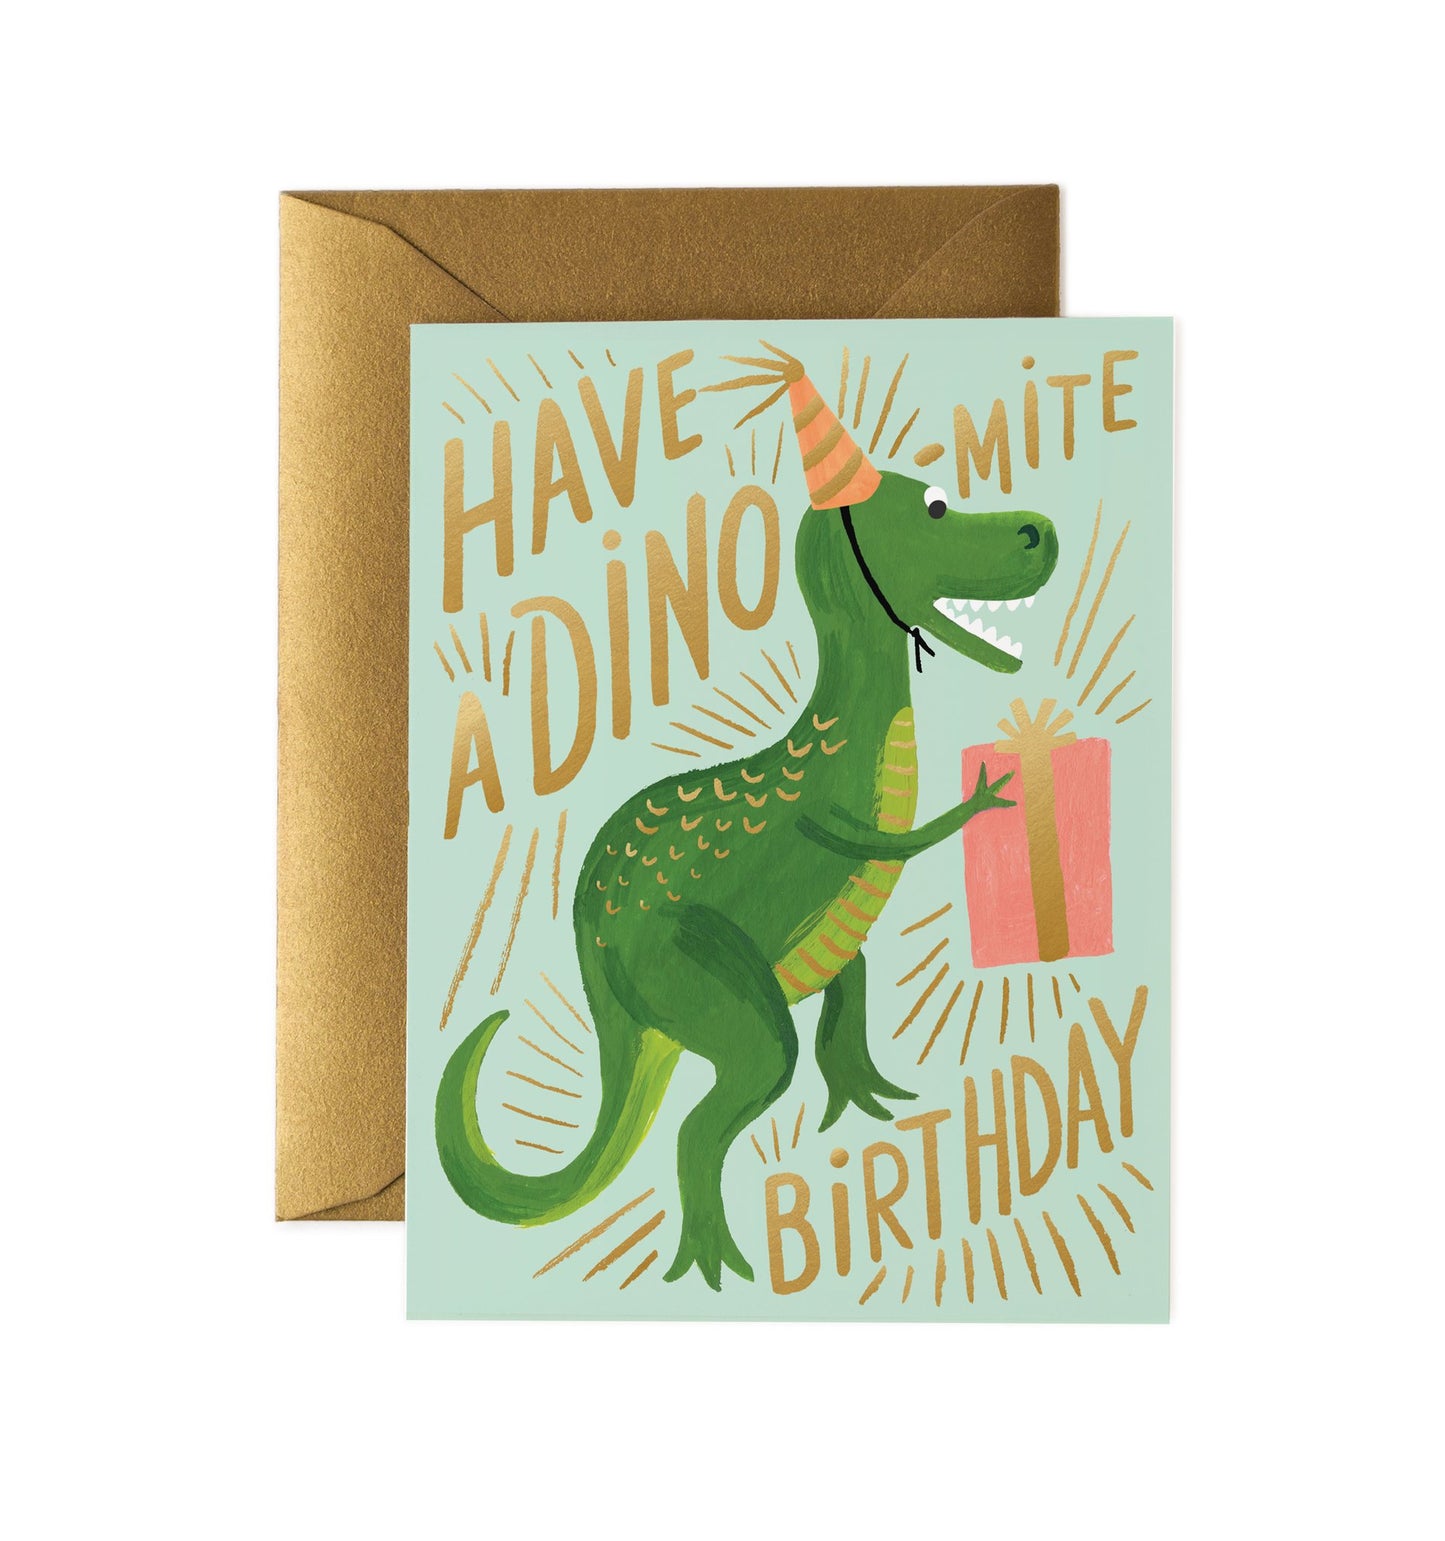 Have a dino-mite Birthday birthday card by Rifle Card Co.